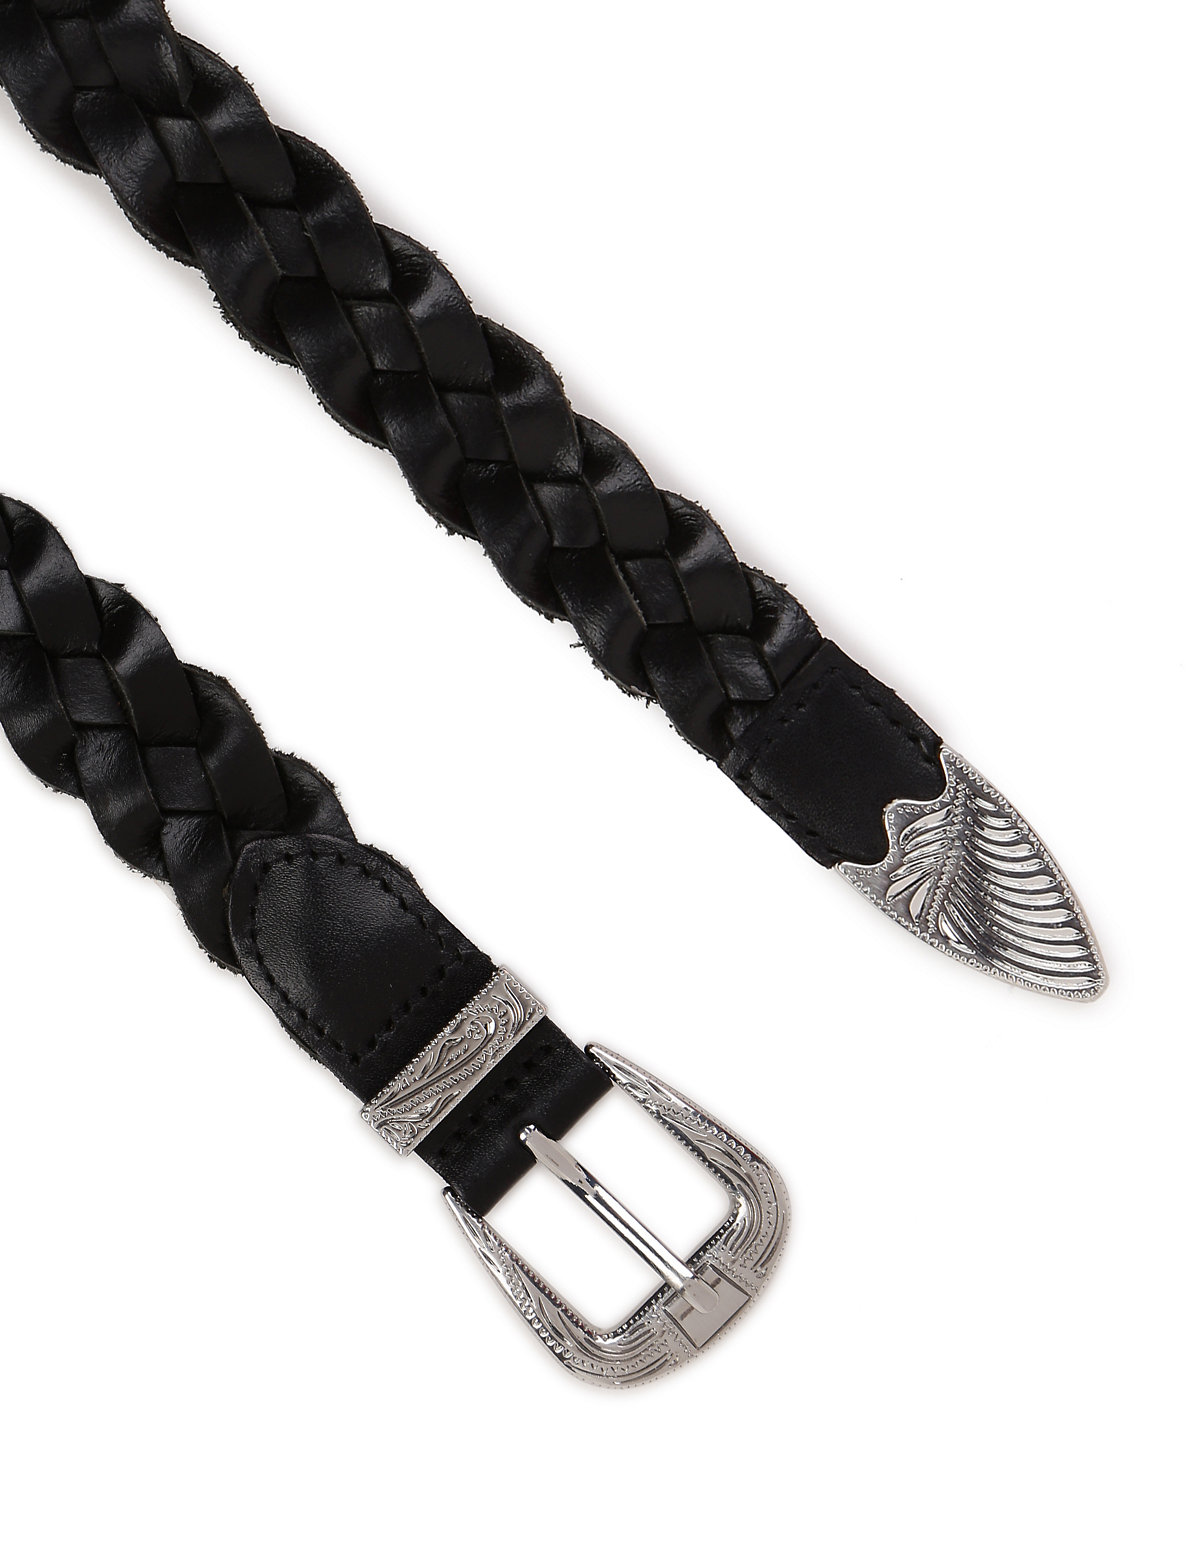 Leather Braided Belt With Buckle Closure